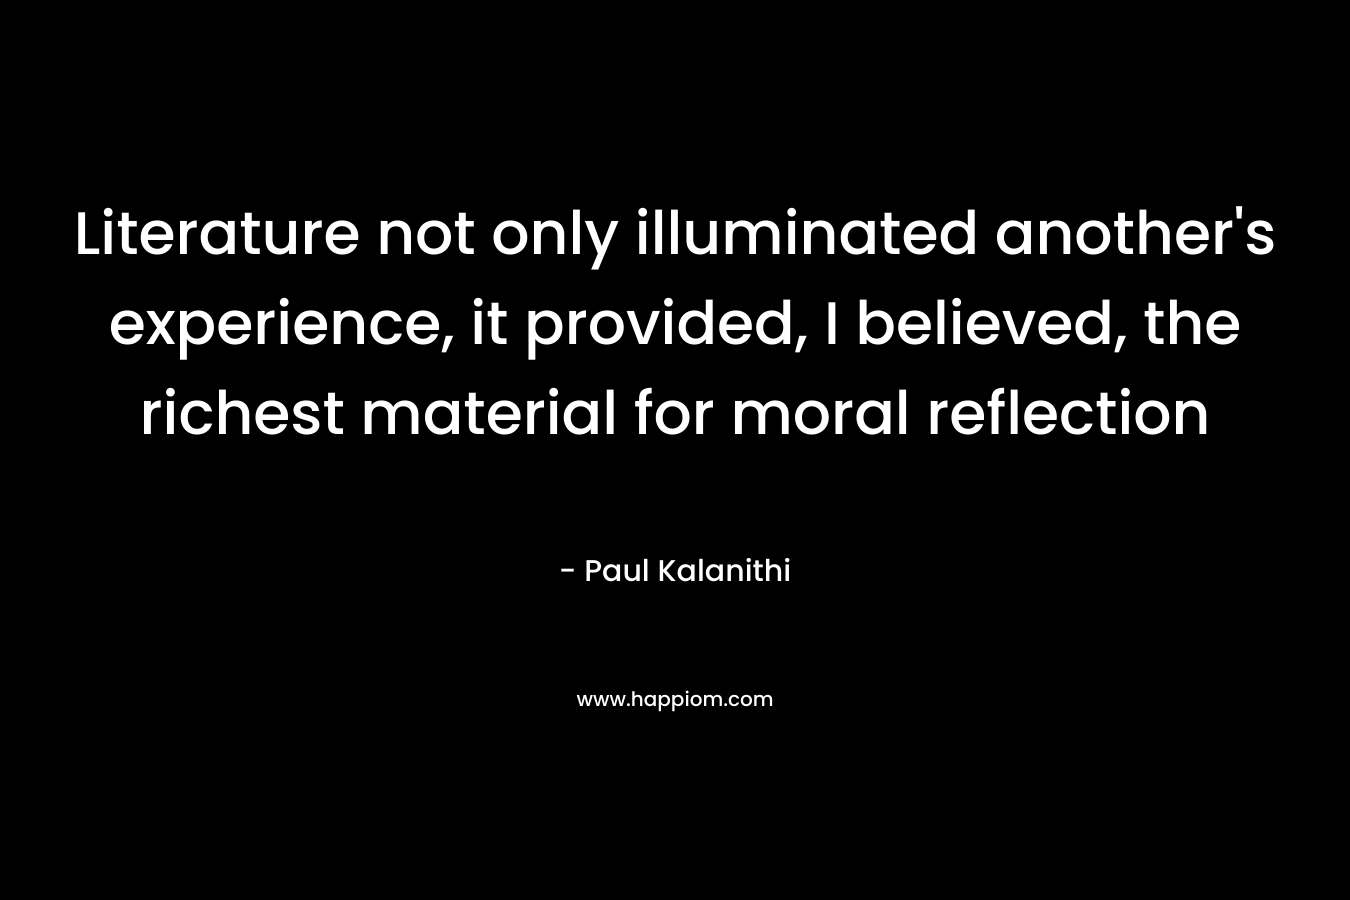 Literature not only illuminated another’s experience, it provided, I believed, the richest material for moral reflection – Paul Kalanithi